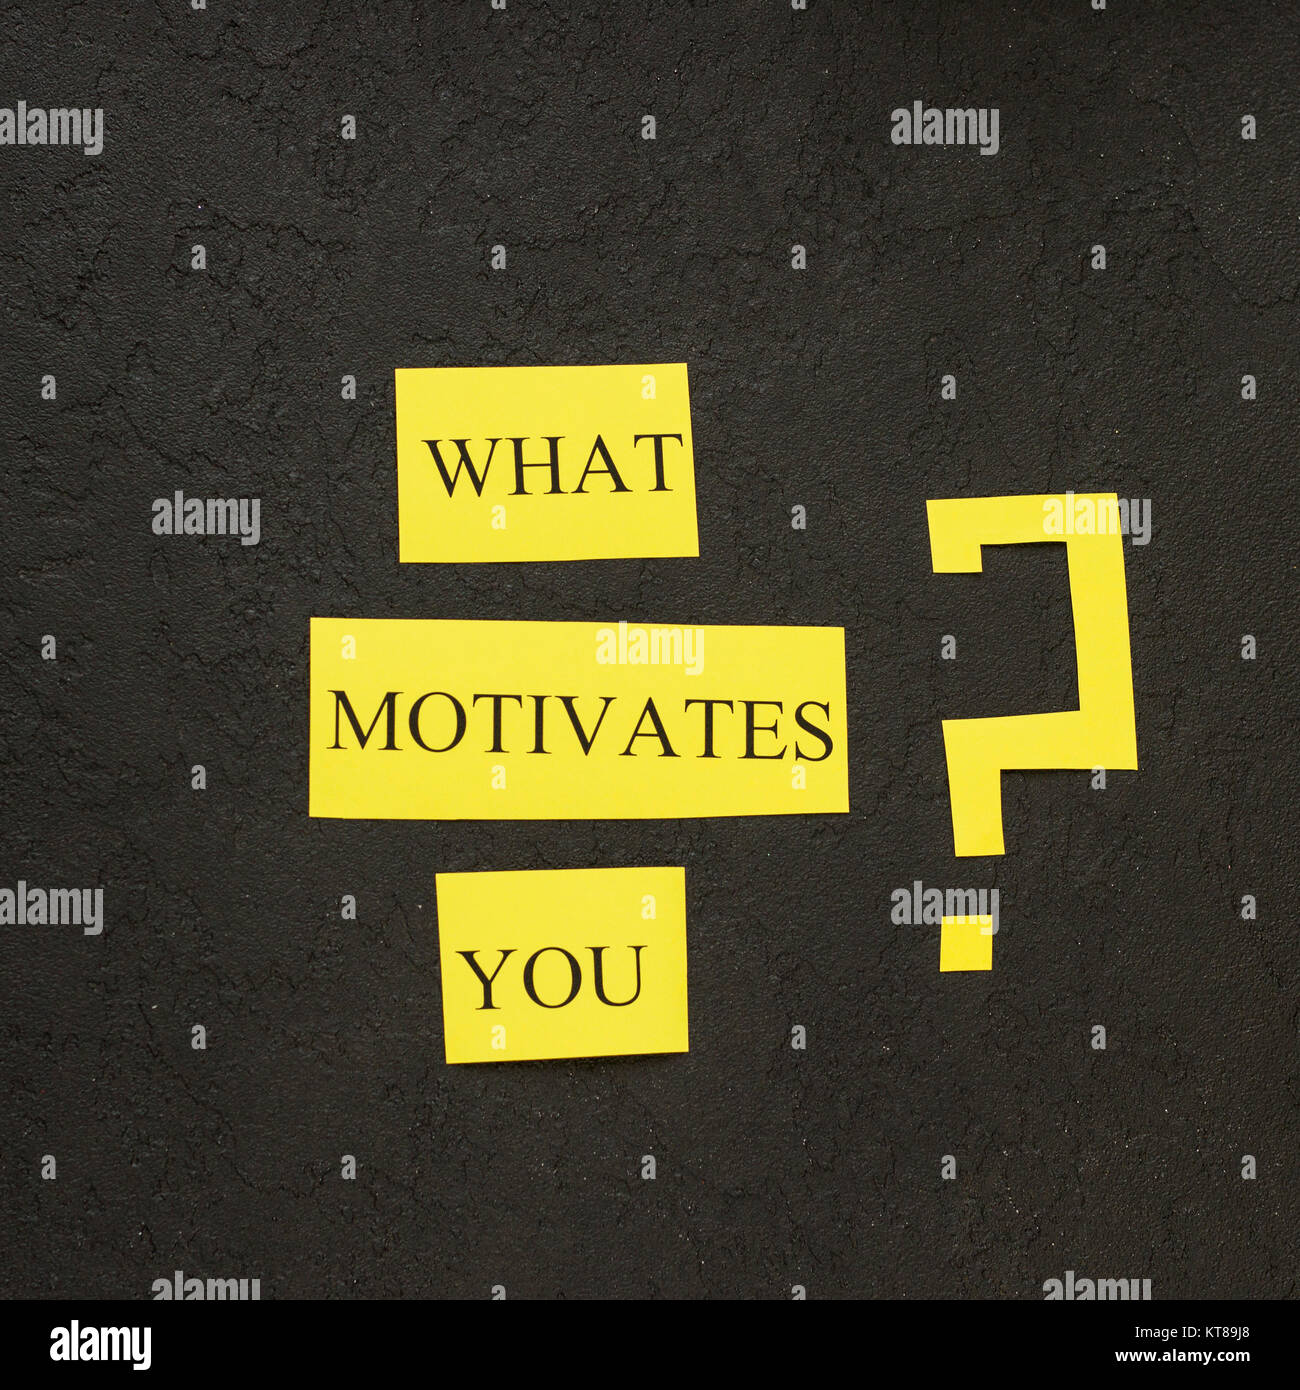 What motivates you question printed on a yellow paper. Black concrete background. Business and work concept. Space for your text or product display.To Stock Photo